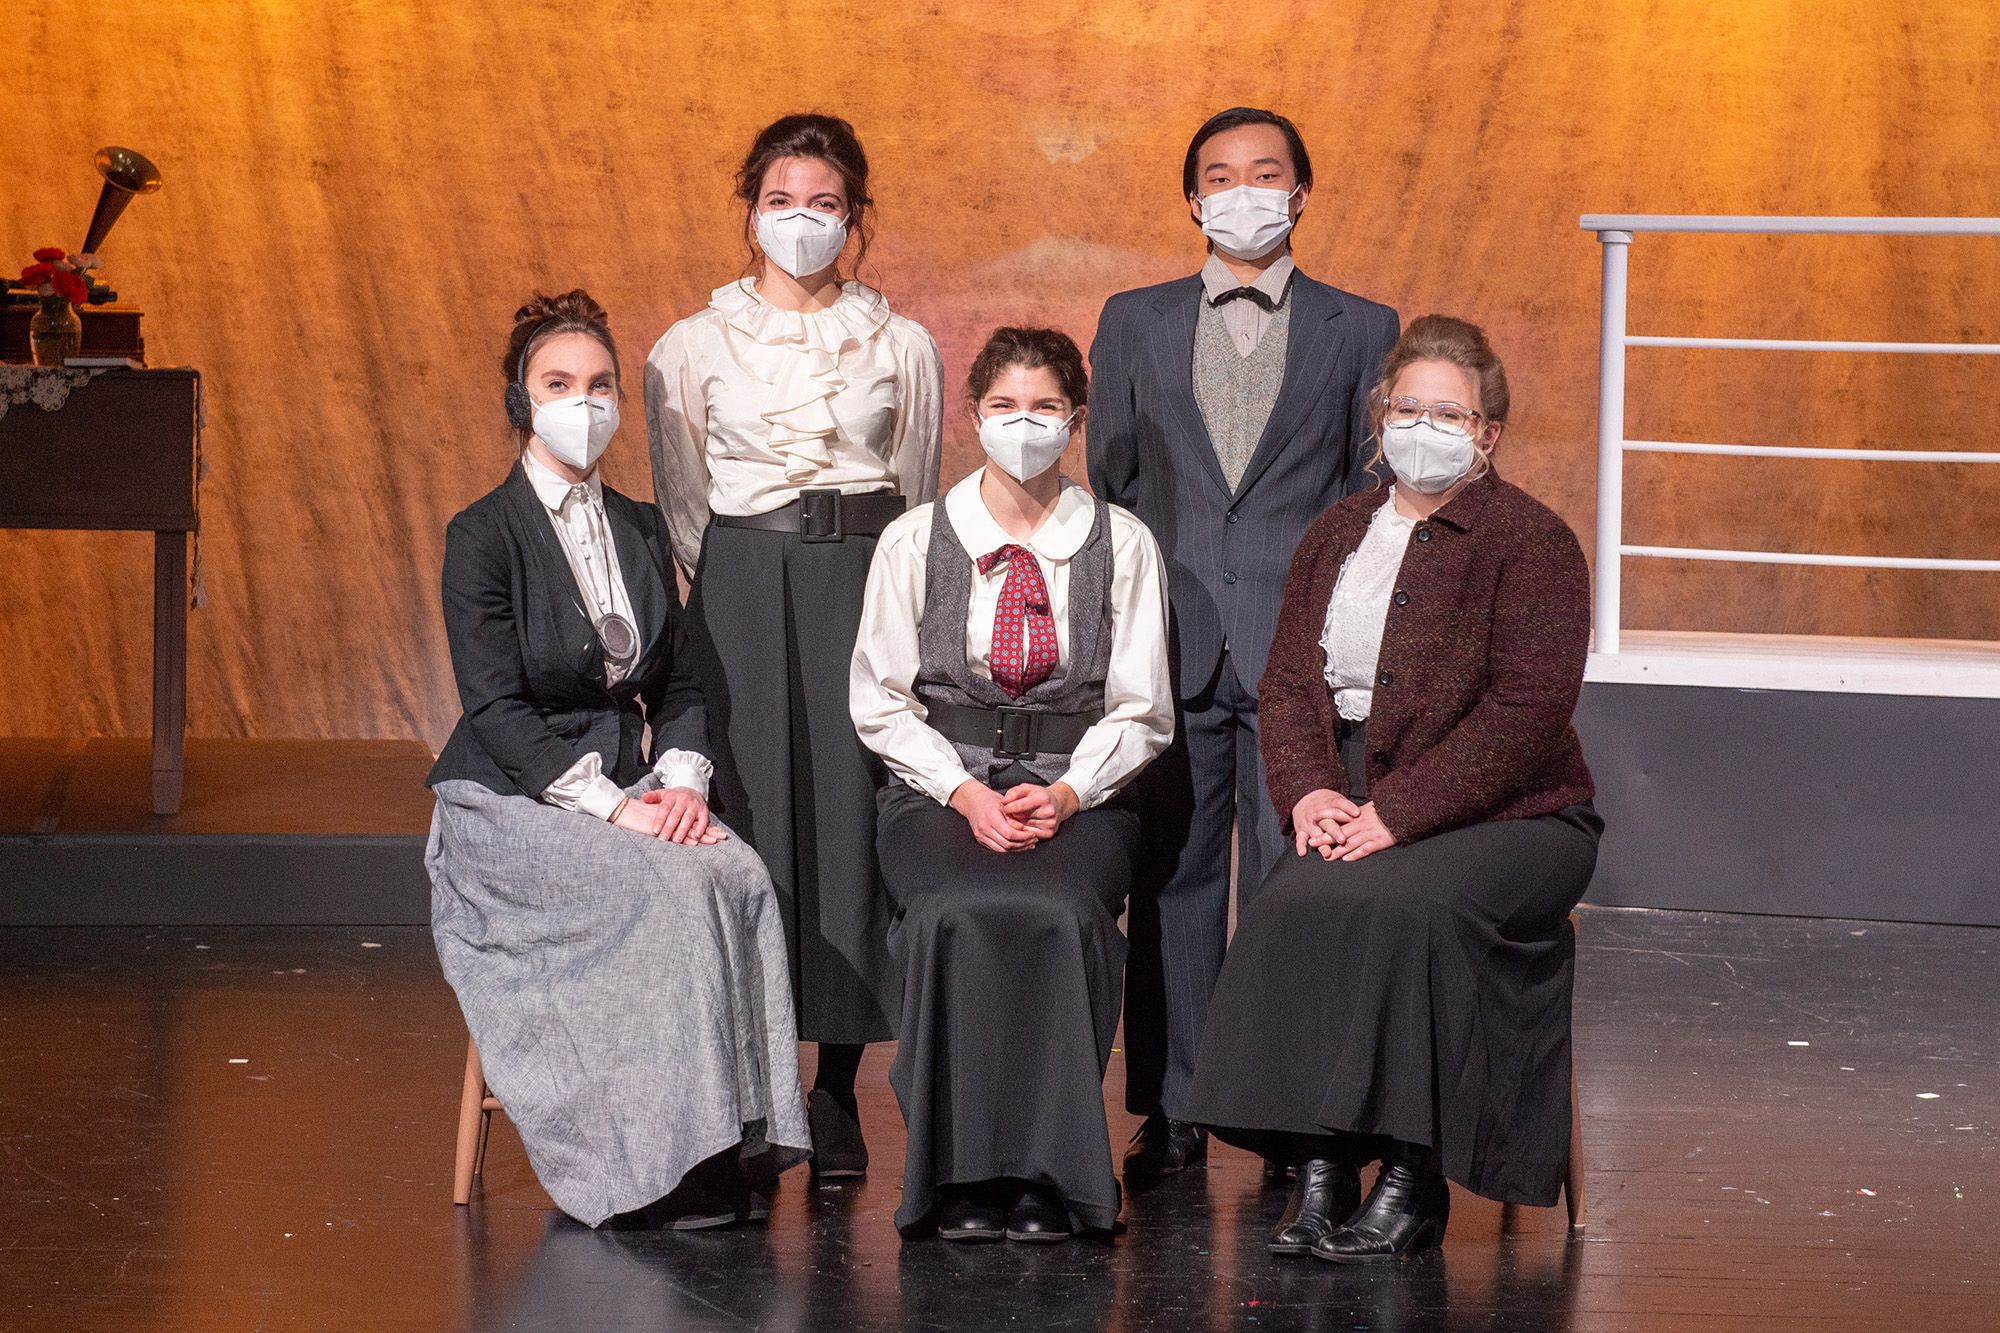 Cast photo from Silent Sky, Hesston College spring 2021